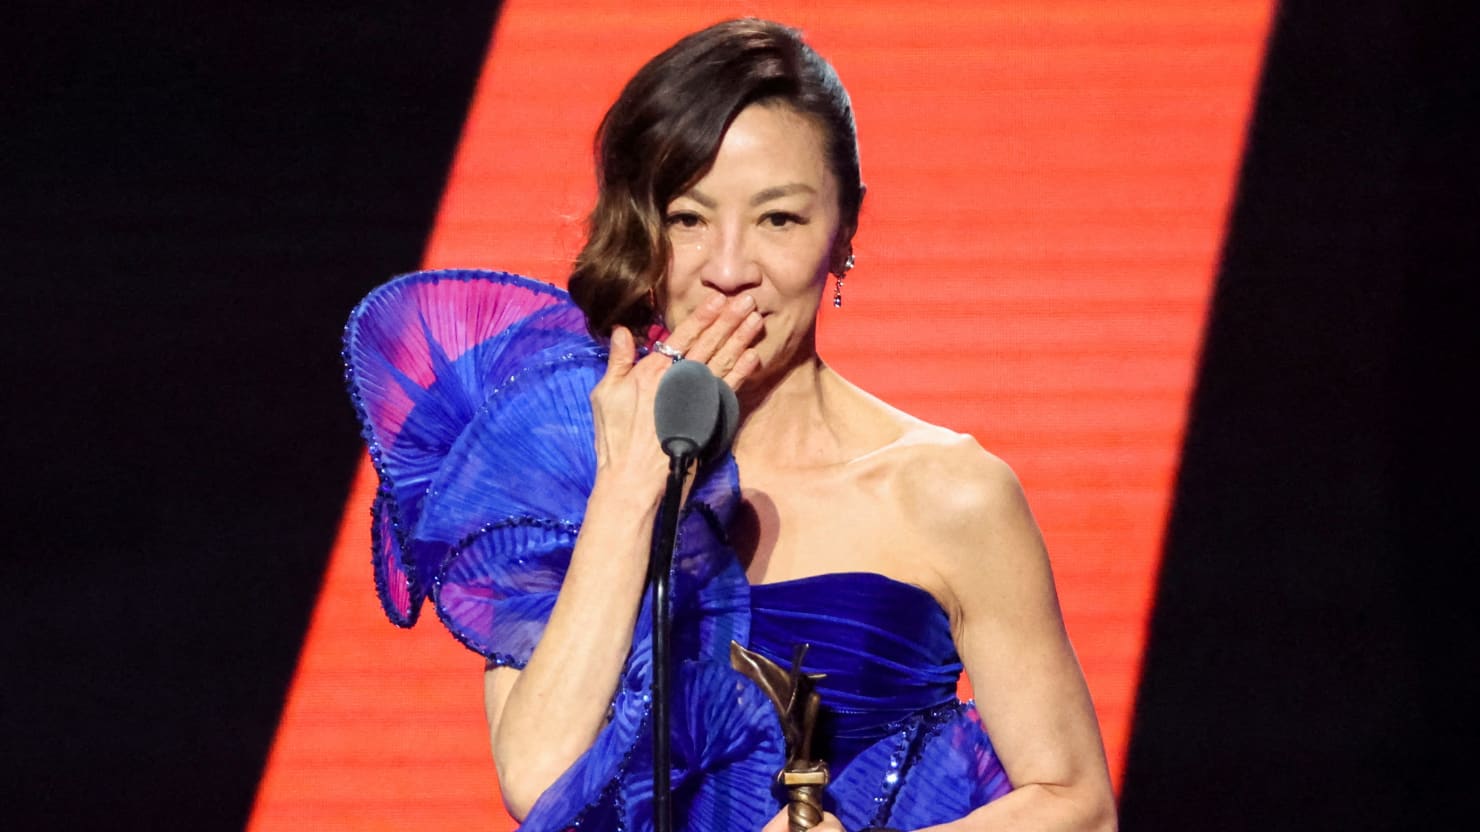 Michelle Yeoh Deletes Instagram Post That May Have Violated Academy Rules